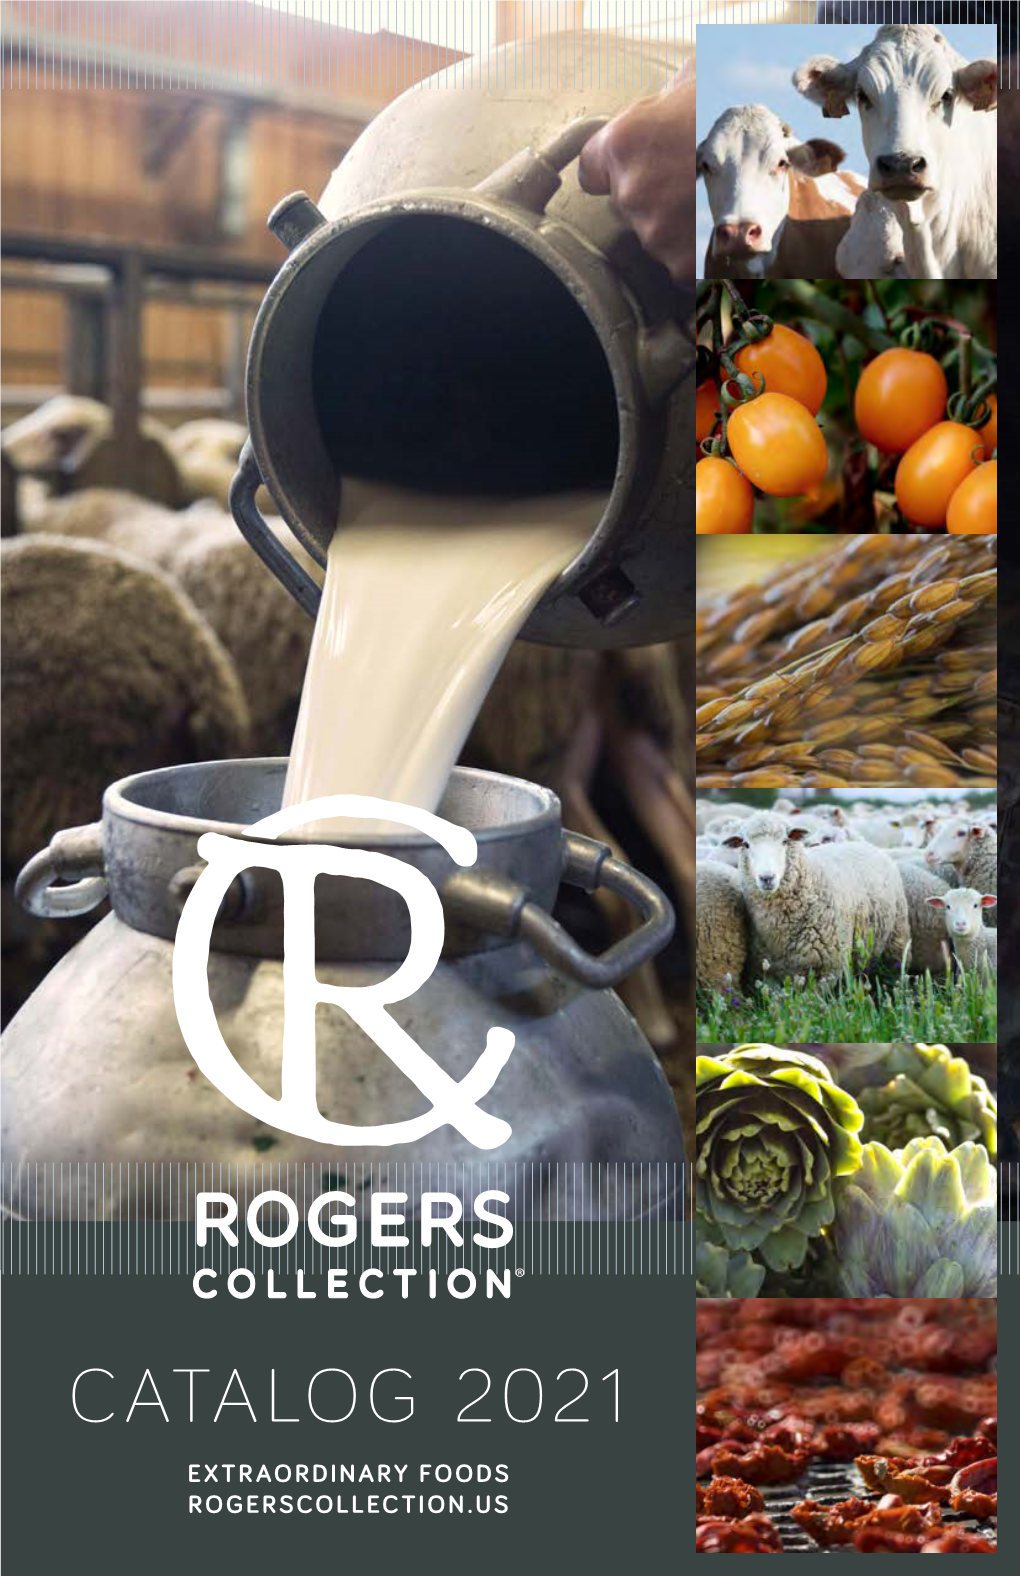 Catalog 2021 Extraordinary Foods Rogerscollection.Us Contents About